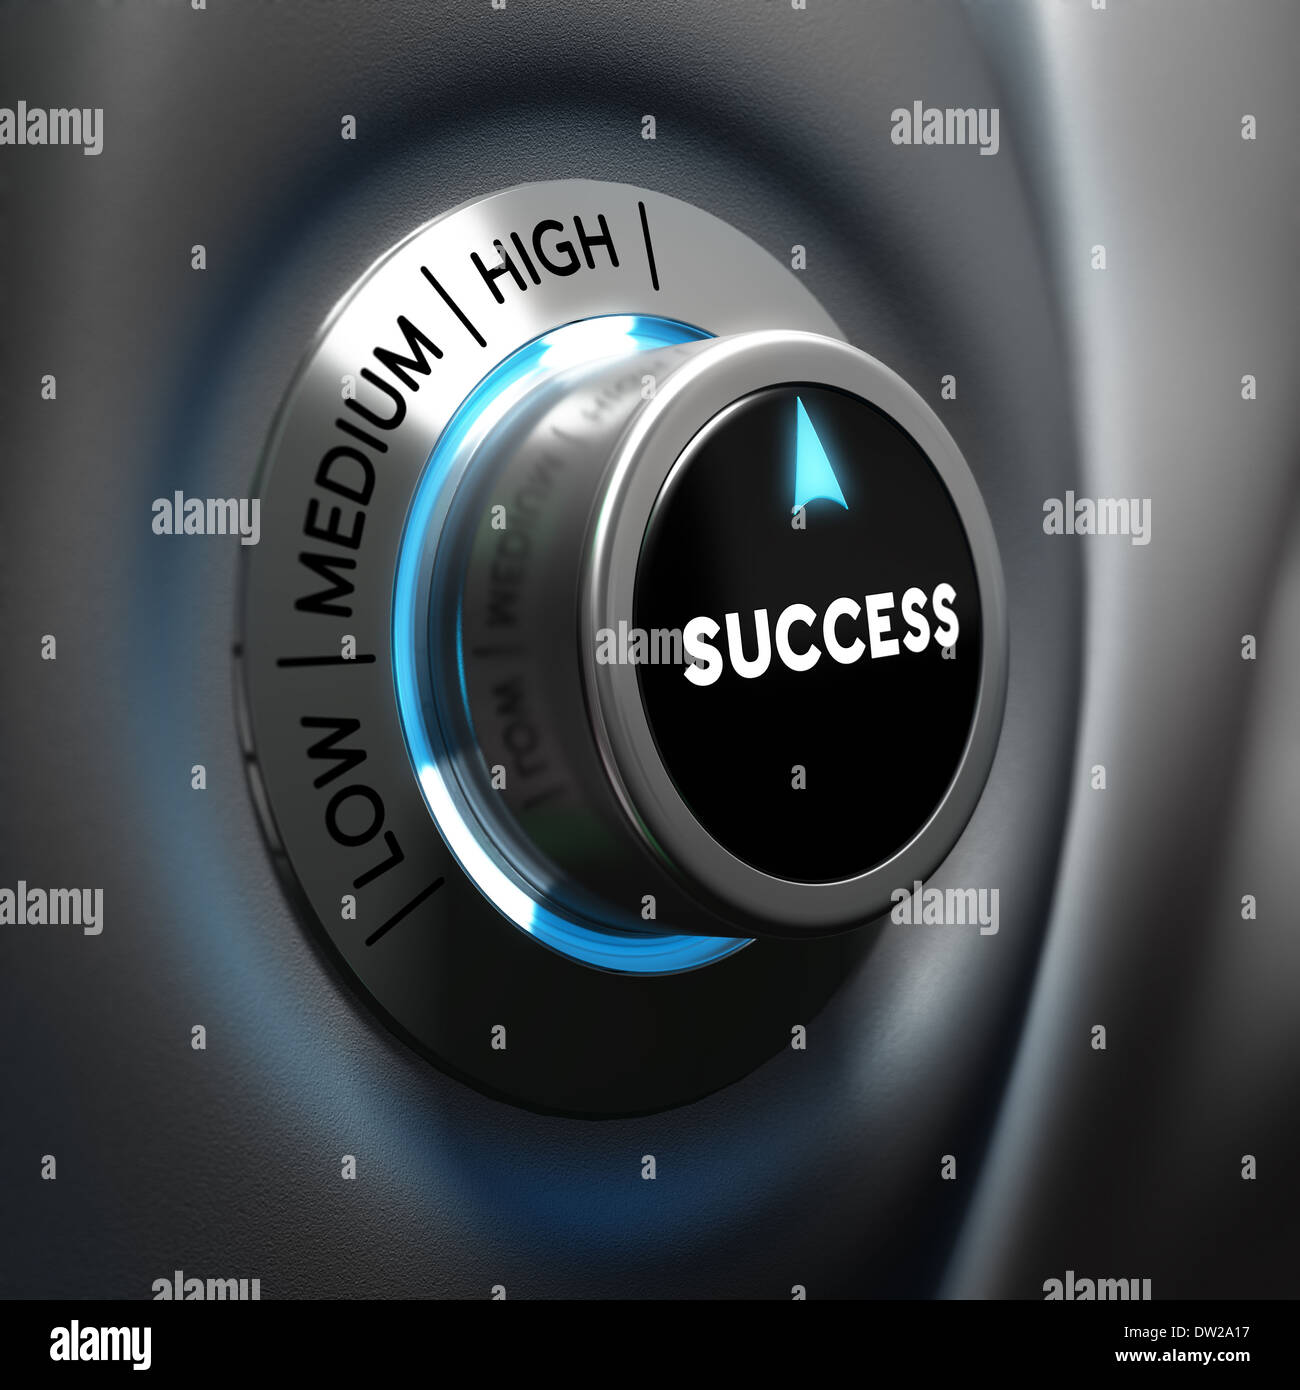 Success selector button with blue and grey tones. Conceptual 3D render image with depth of field blur effect. Stock Photo